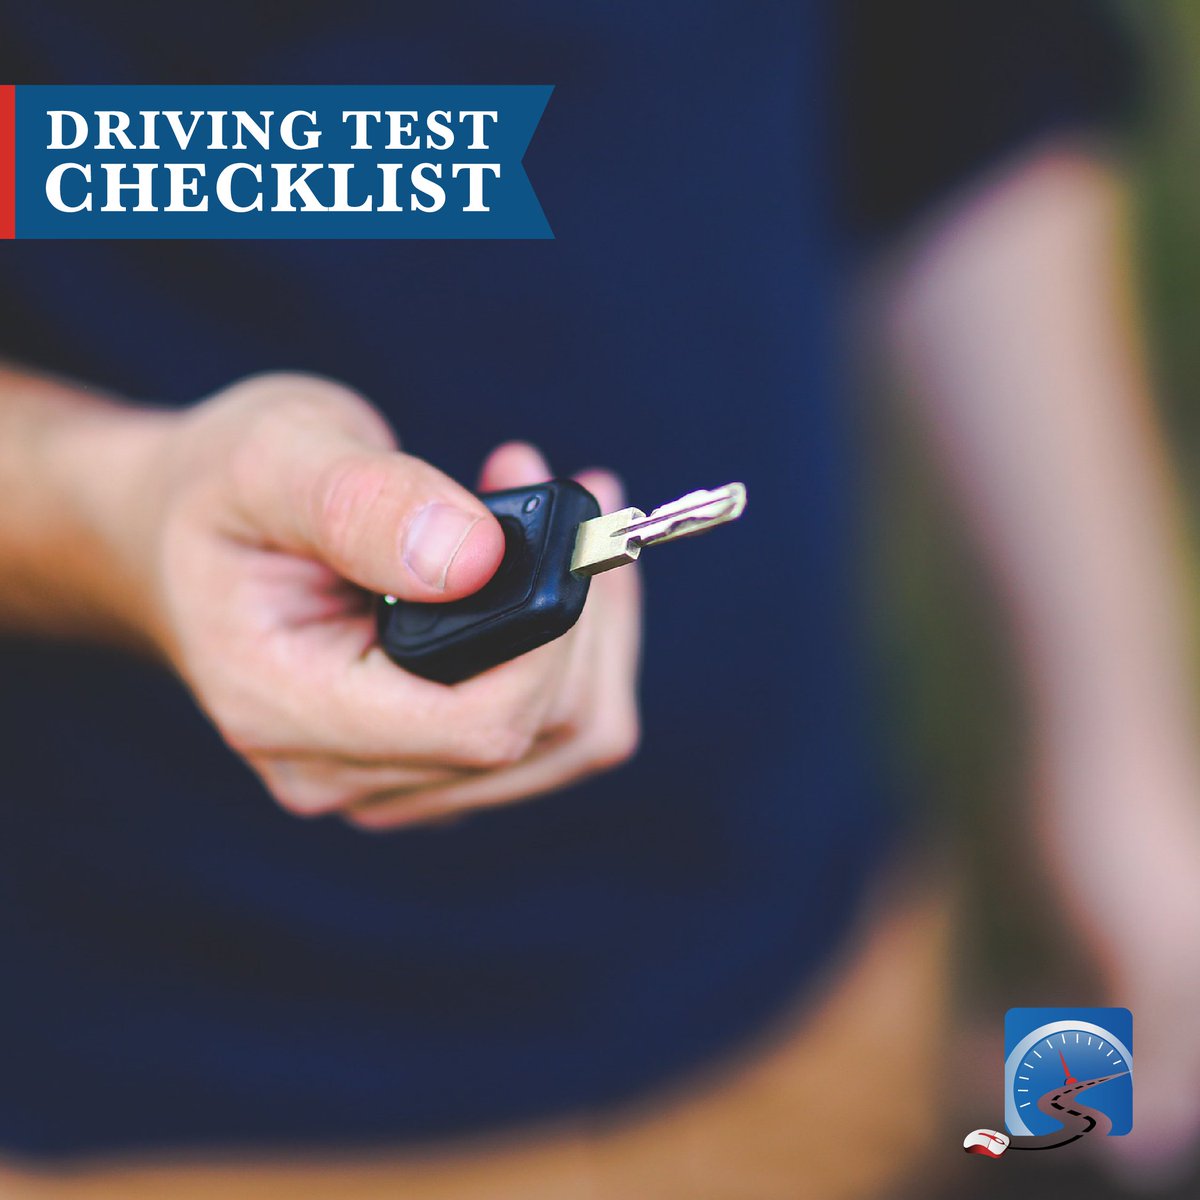 DRIVER'S TEST CHECKLIST CLICK to get all the information you need to pass your driver's test the first time! Get your DON'T FAIL Your Driver's Test checklist here: smartdrivetest.com/pass-drivers-t… #drivingtest #drivingperformance #drivingschool #drivingtesttips